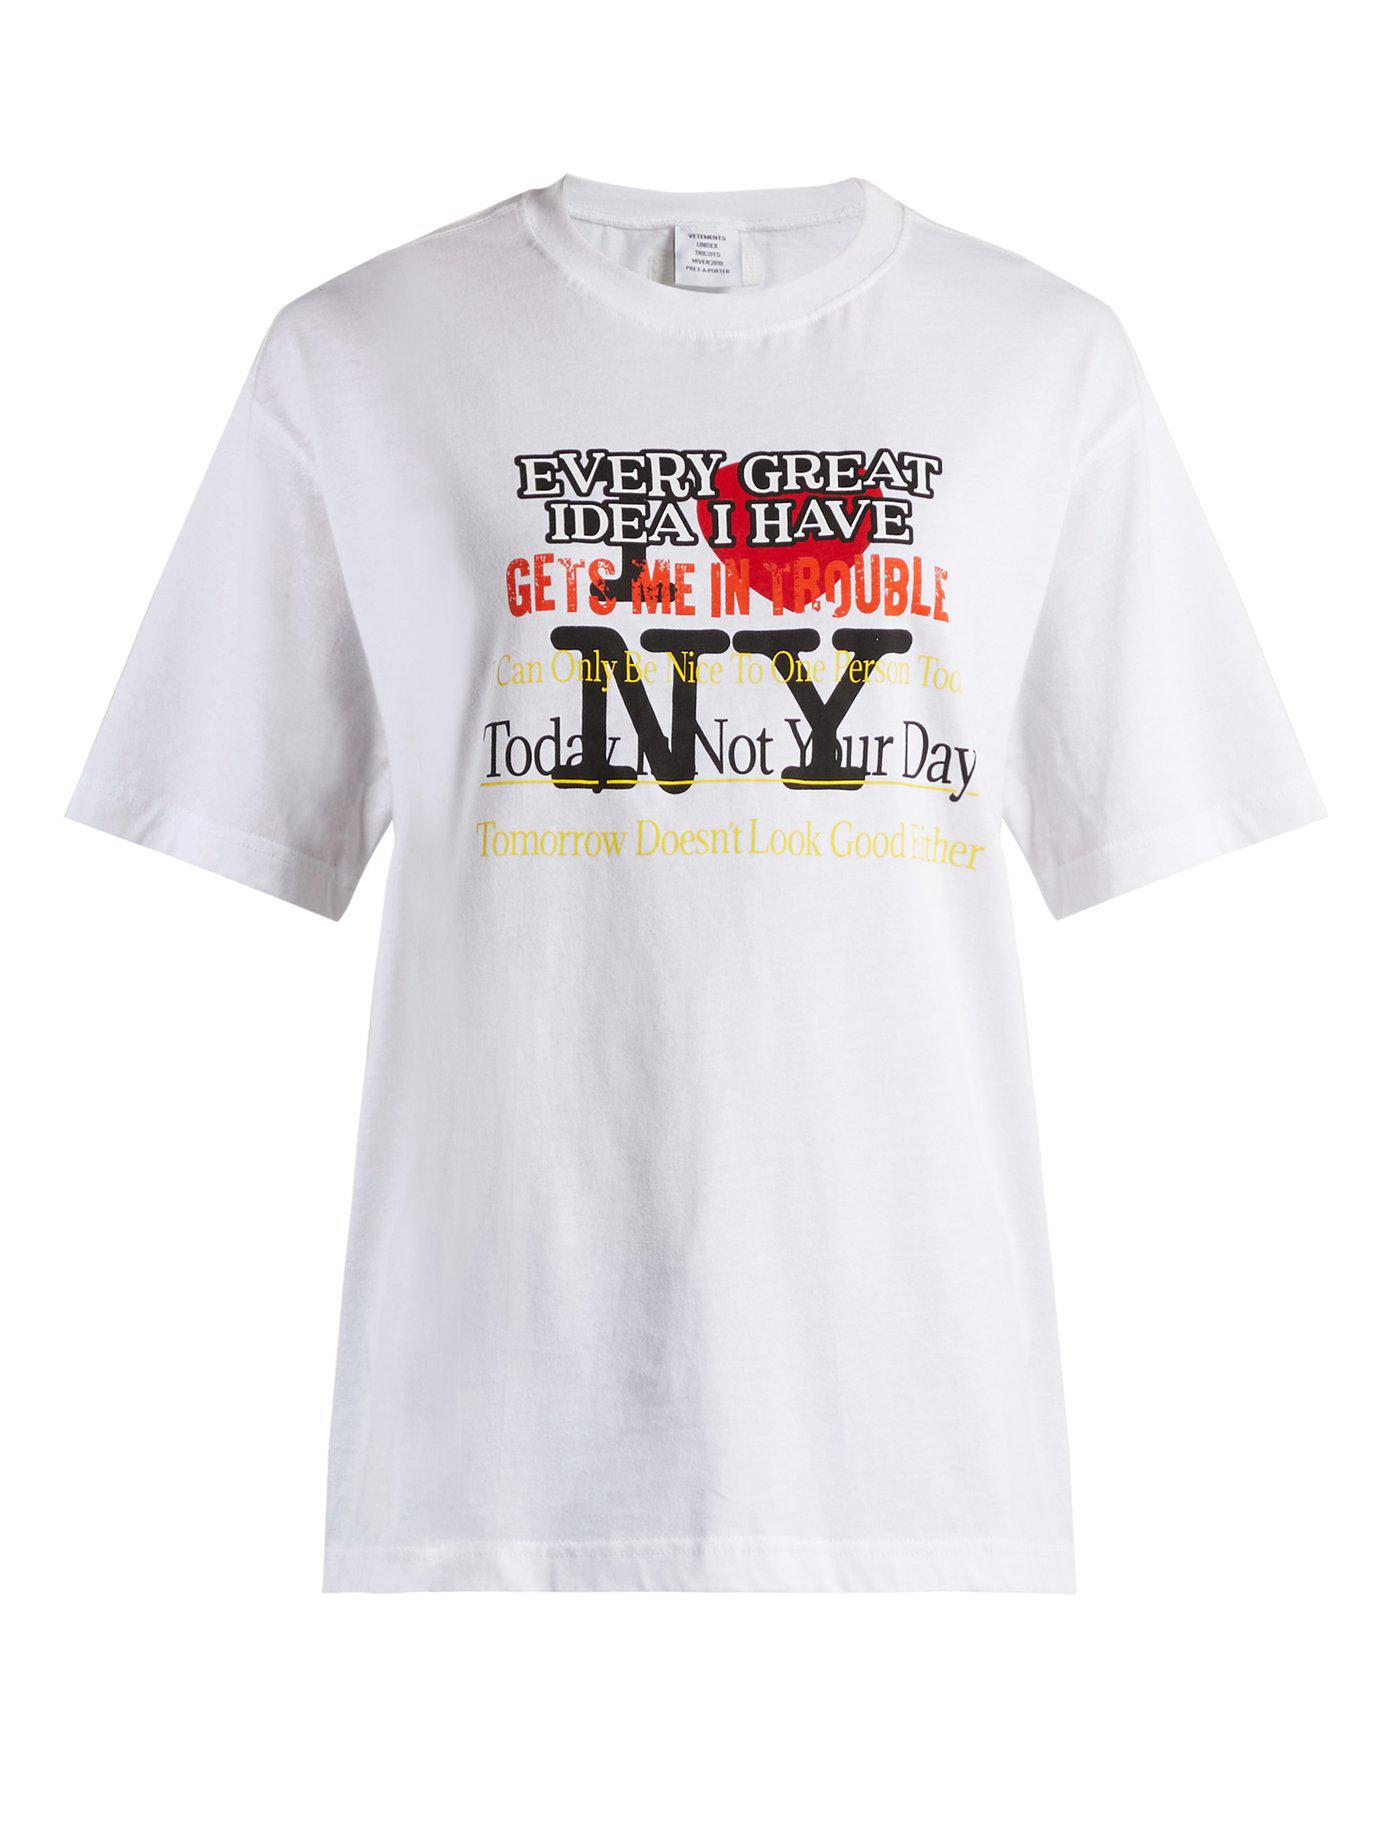 Vetements New York Print Cotton T Shirt in White | Lyst Canada